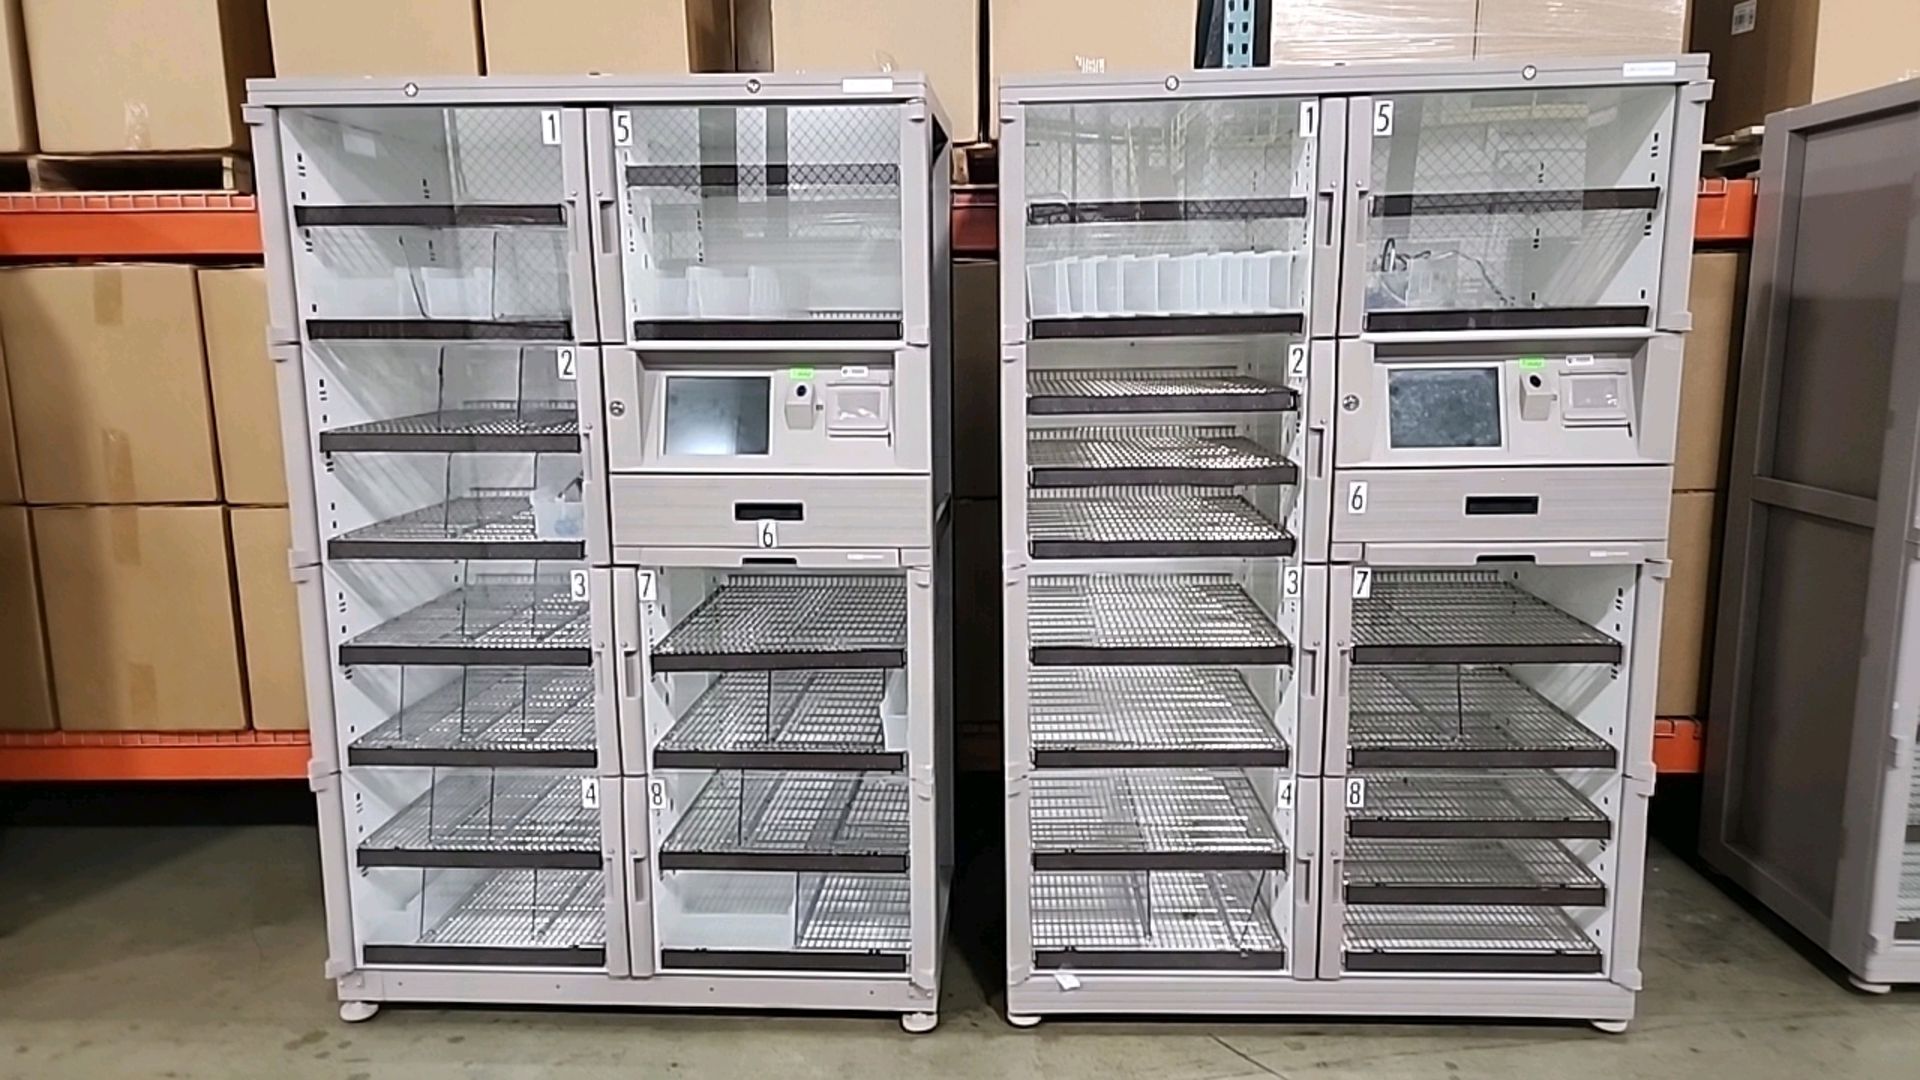 BD PYXIS 347 UNIVERSAL 601 SUPPLY CABINET, 2-DOOR, QTY(2) LOCATION: 100 GOLDEN DR. CODE: 219